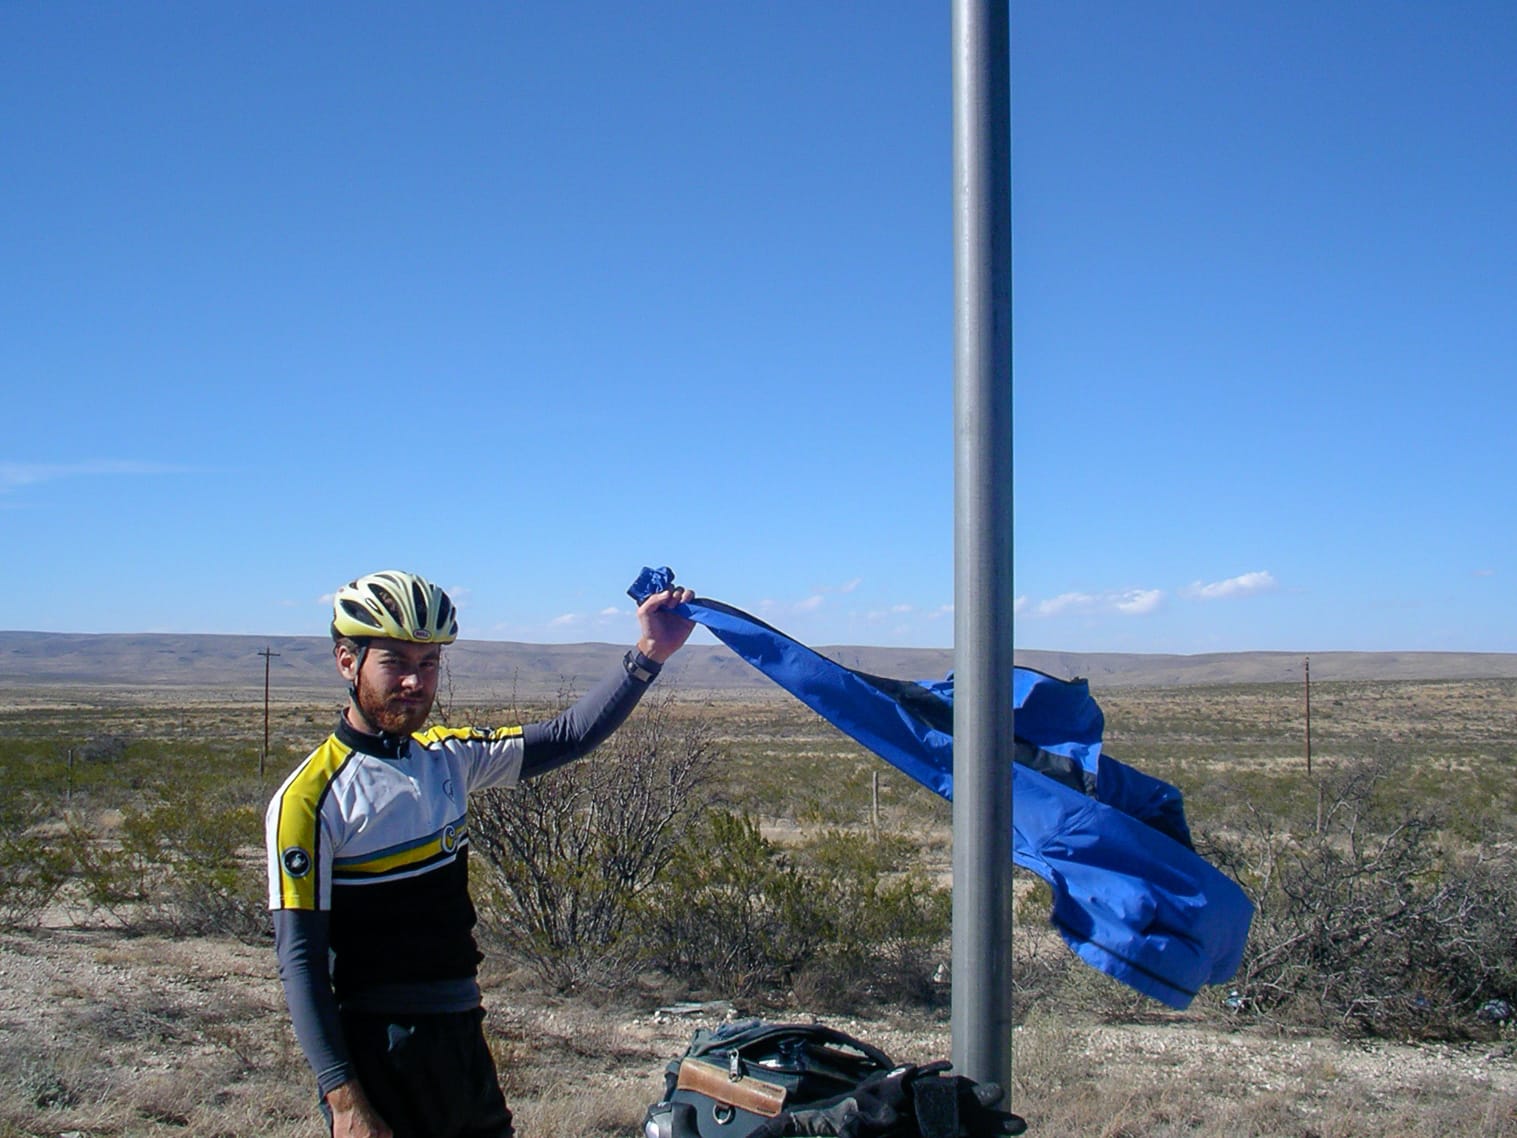 A demonstration of wind resistance